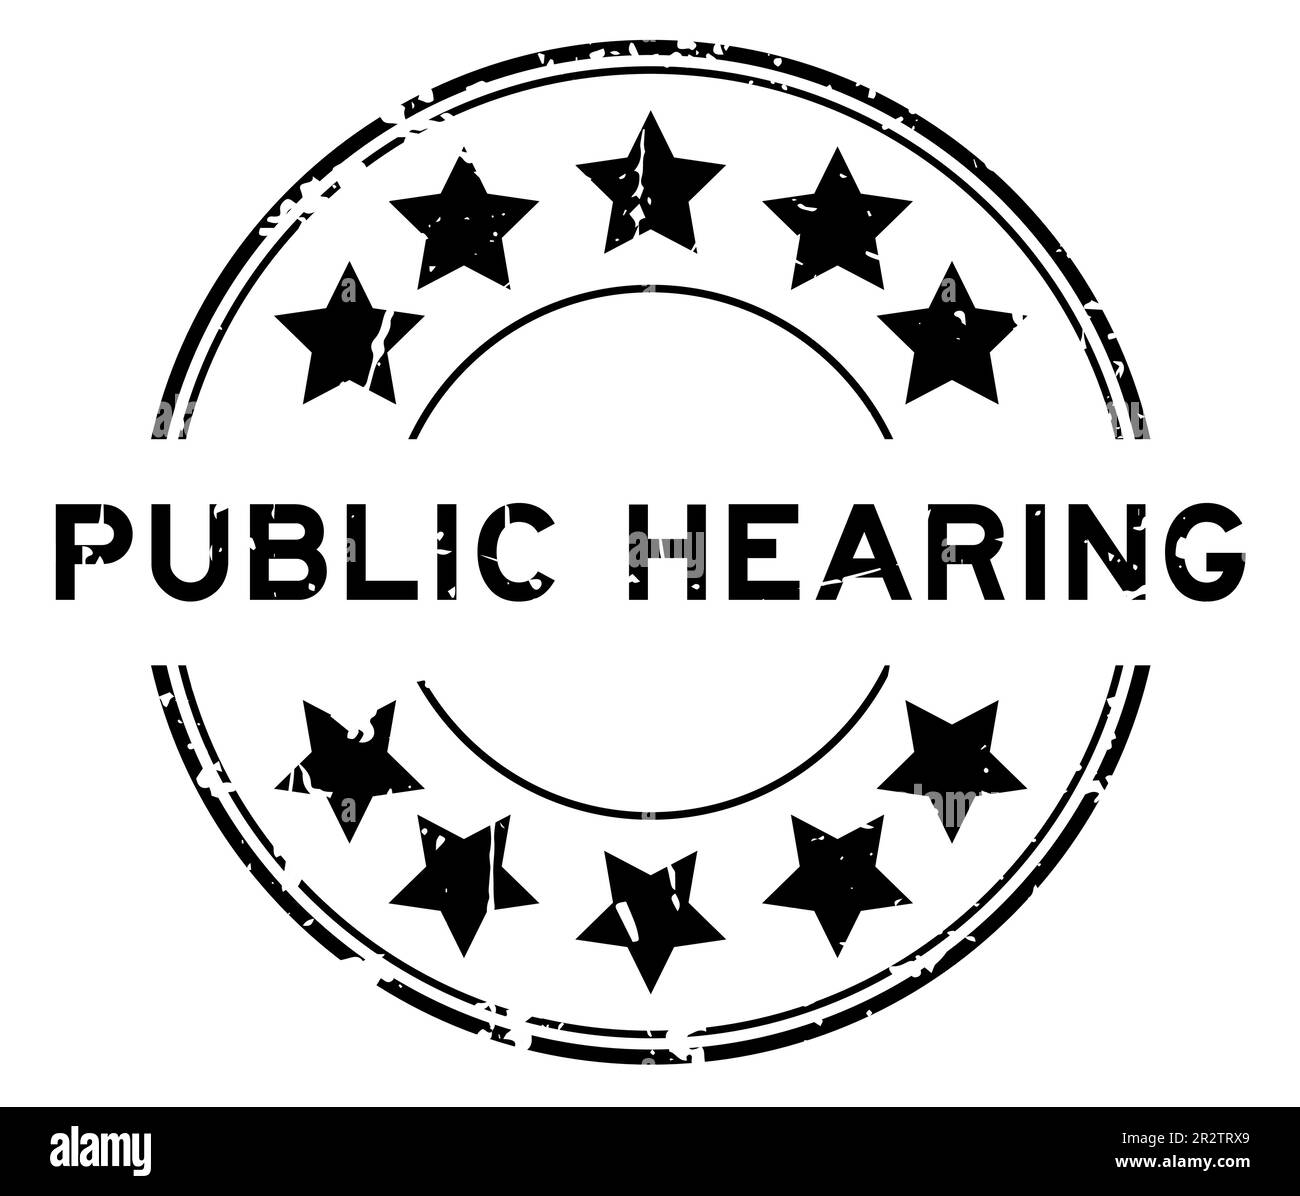 Grunge black public hearing word with star icon round rubber seal stamp on white background Stock Vector